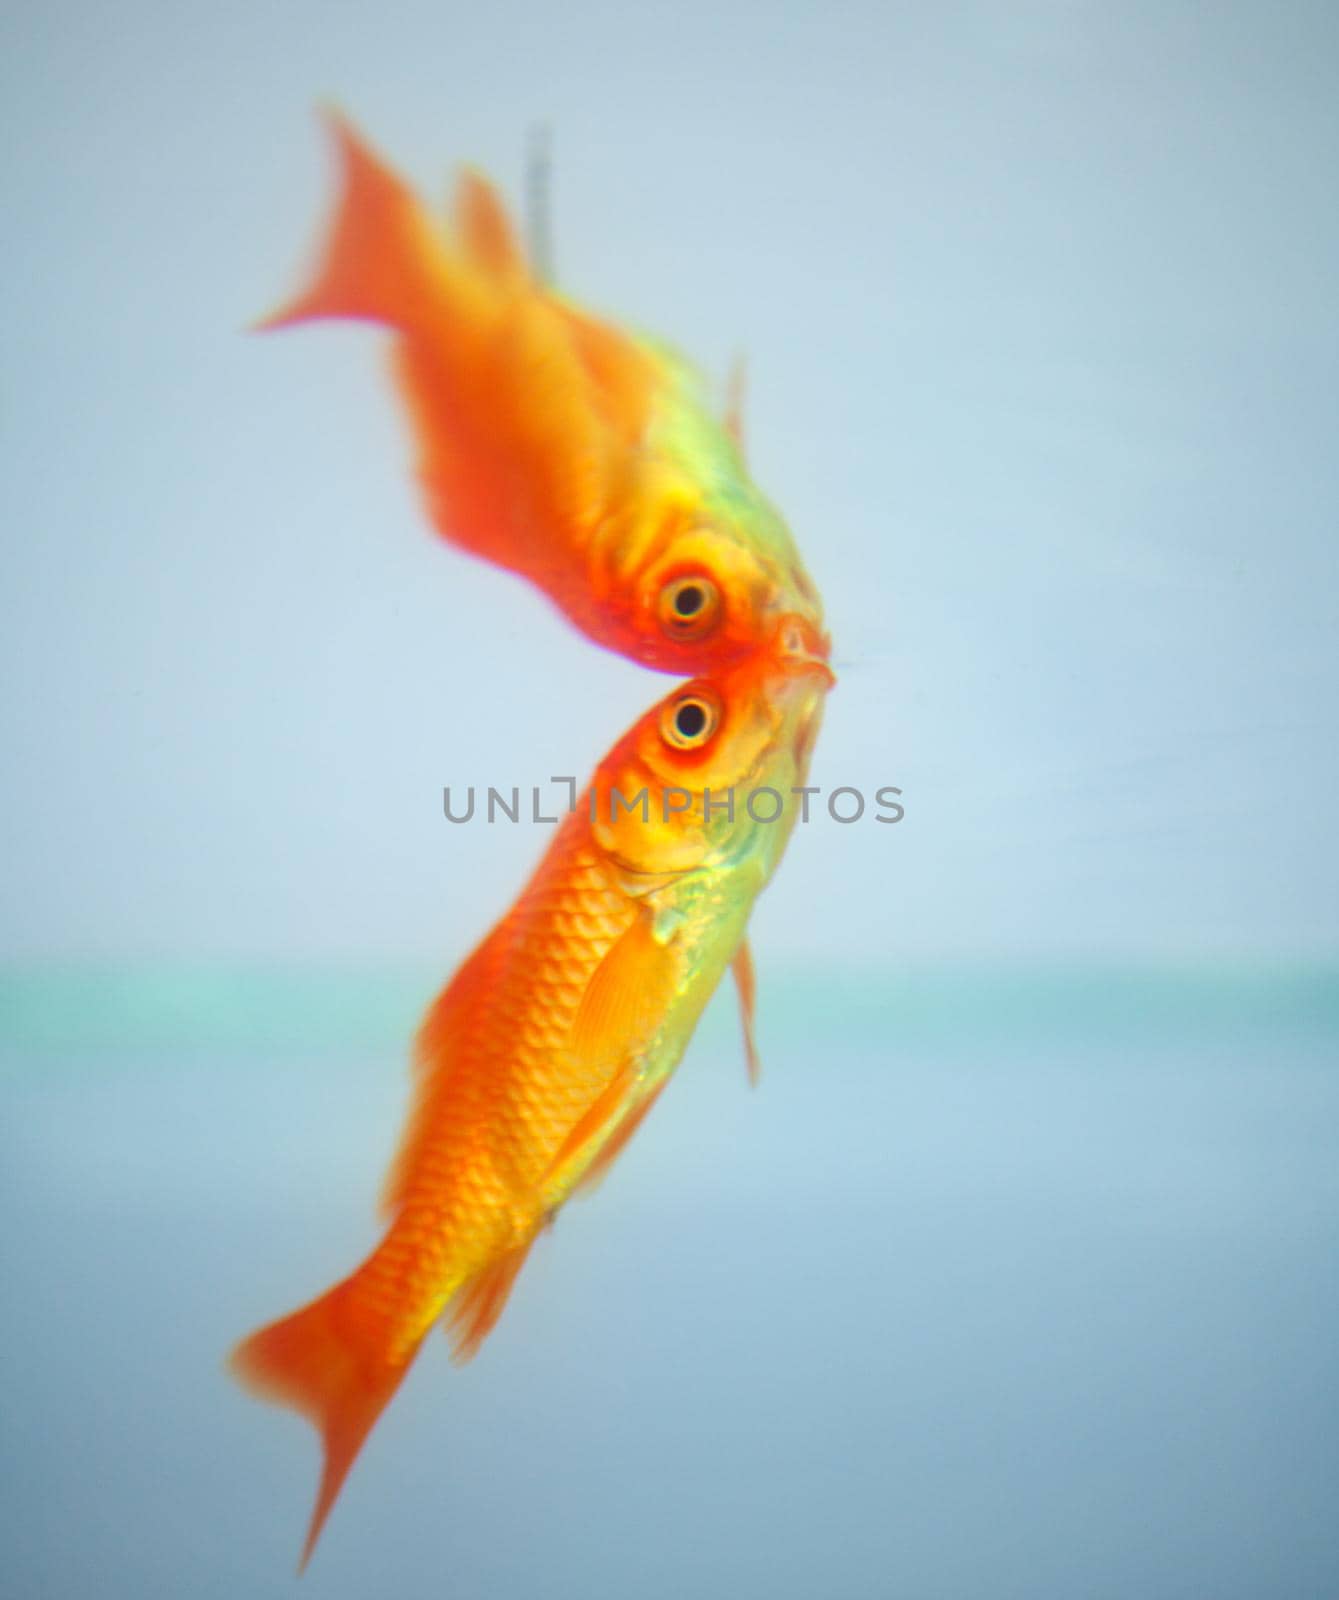 A goldfish reflected in the water